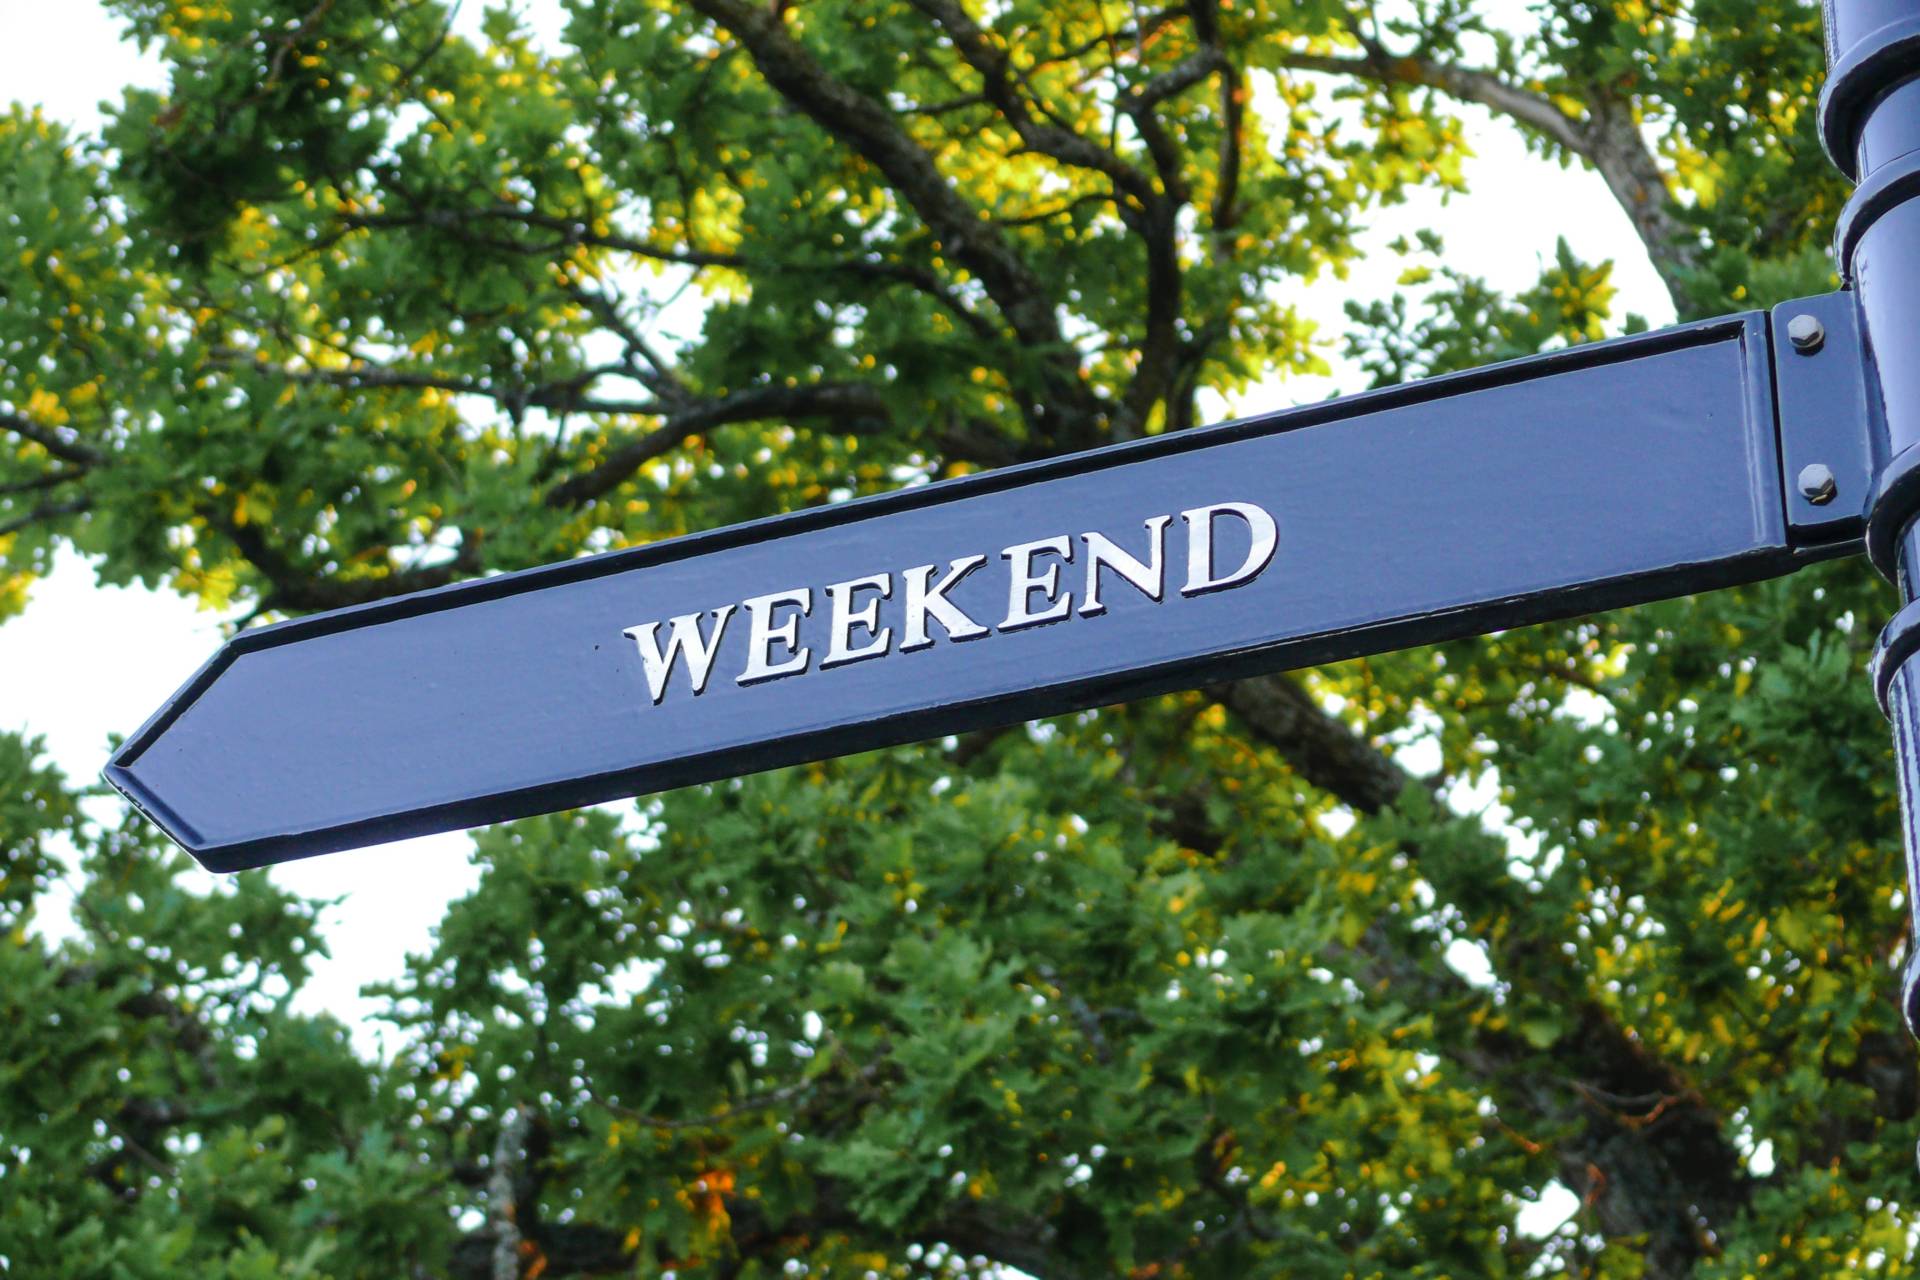 Street sign with the word weekend